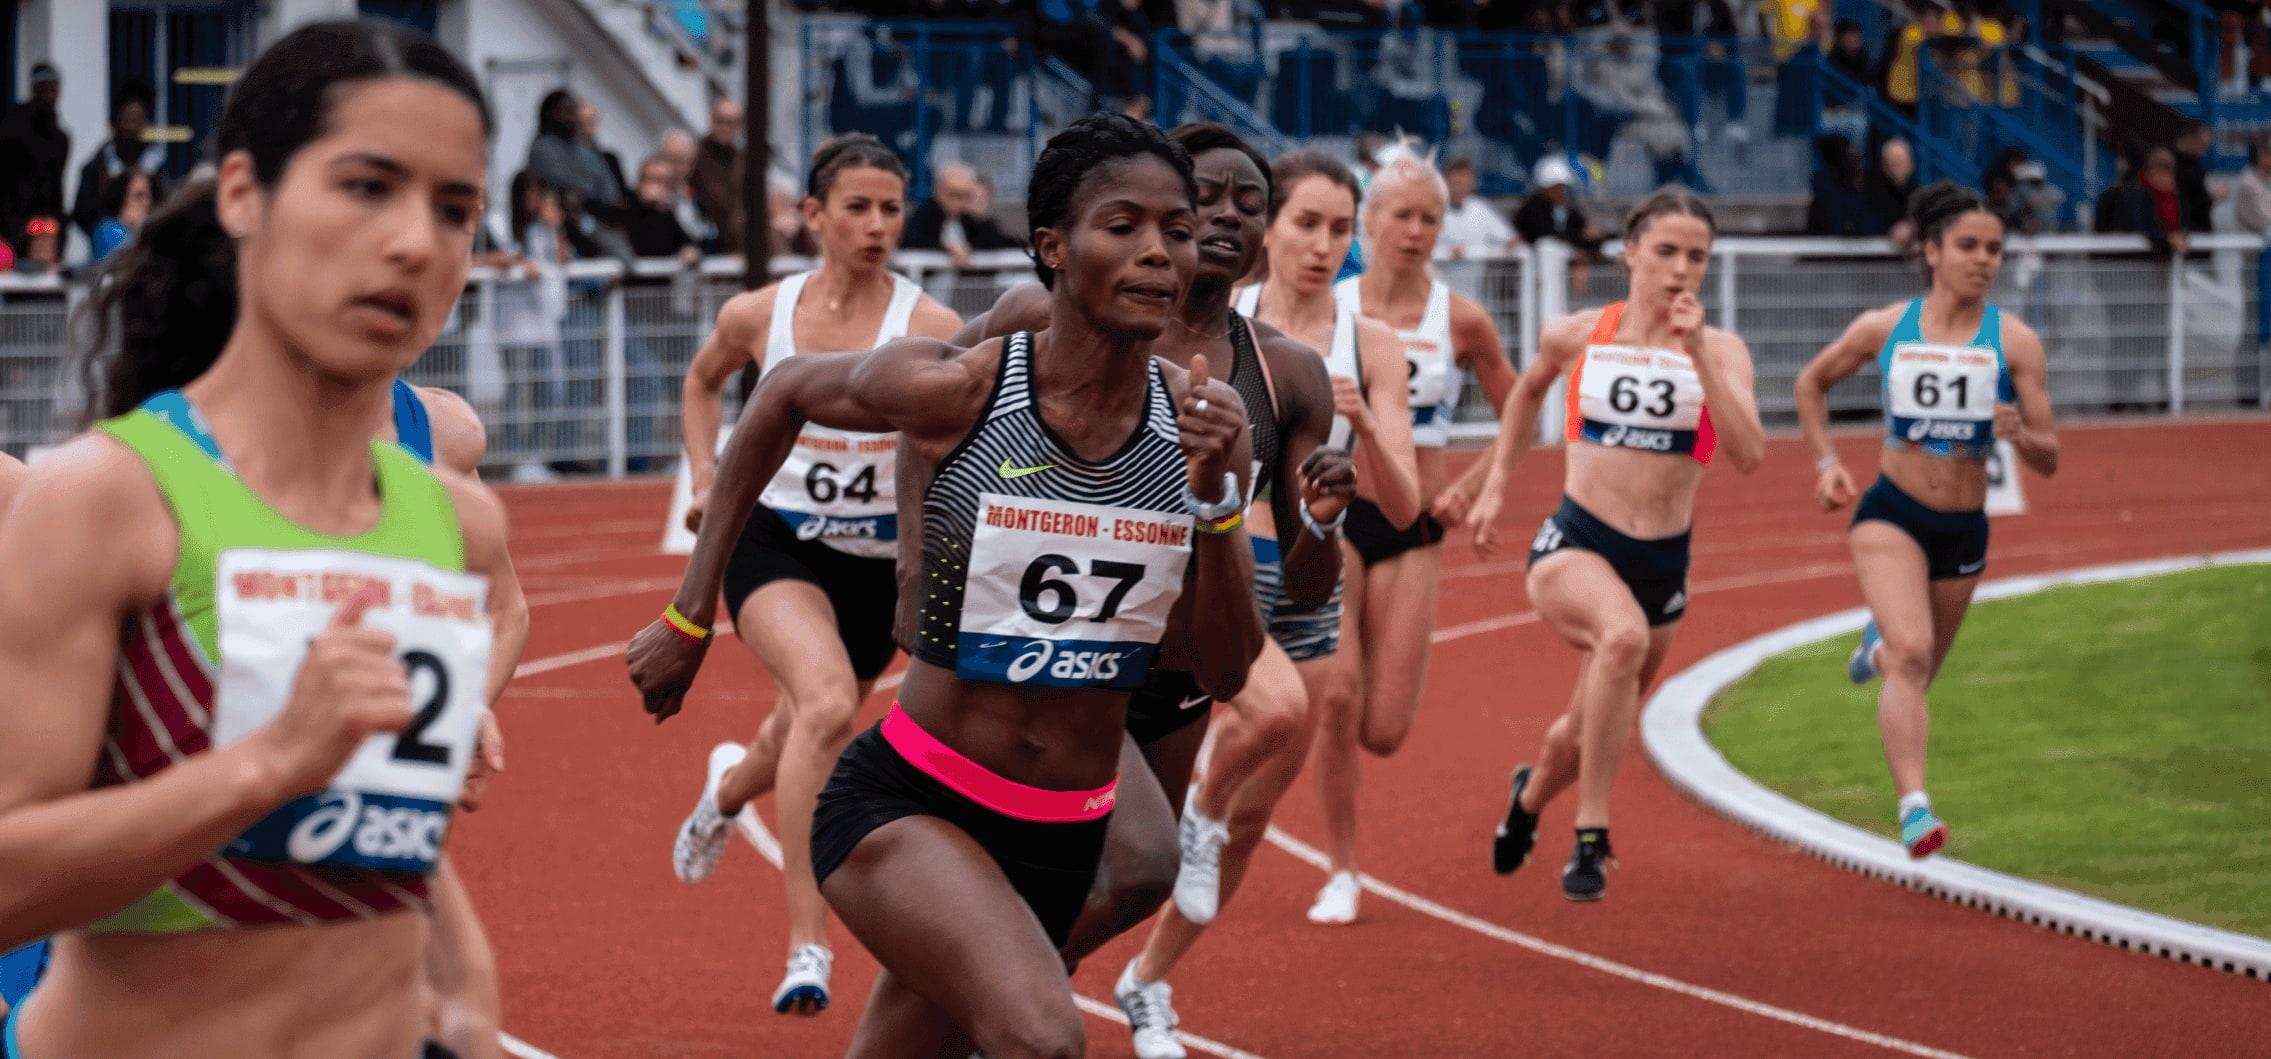 Group of female athletes in a sprint race on an athletics track